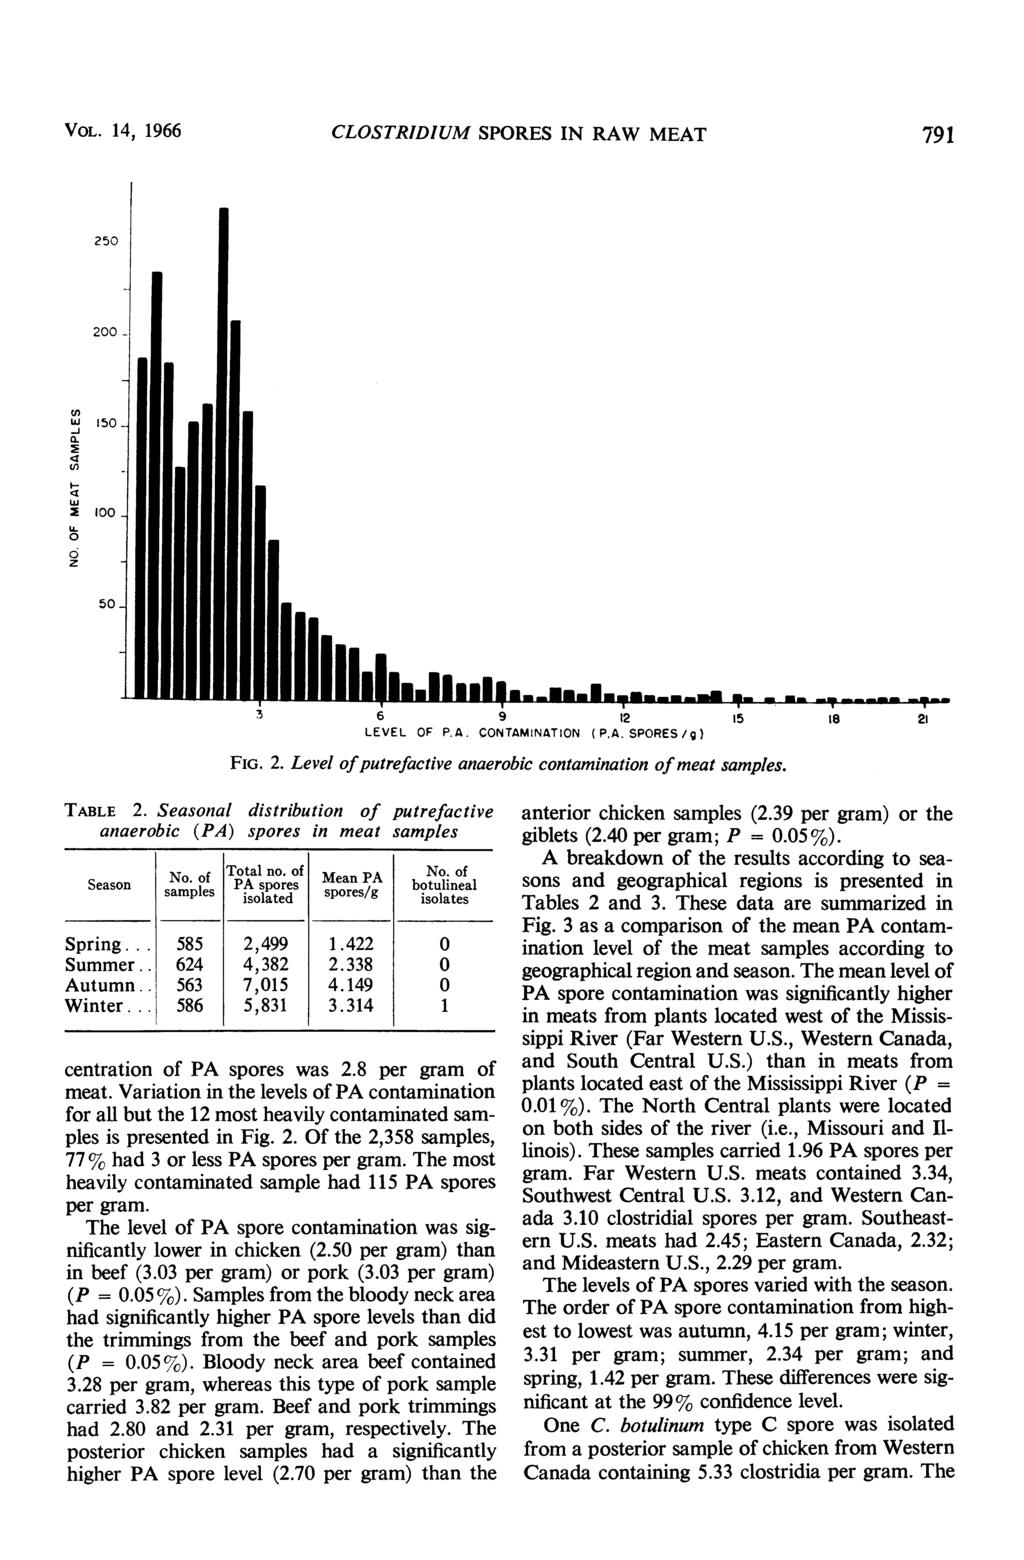 VOL. 14, 1966 CLOSTRIDIUM SPORES IN RAW MEAT 791 250 200 - I I en W 150 a. 2 100 0 z 50 3. 6 9 12 LEVEL OF P.A. CONTAMINATION (P.A. SPORES/g) FIG. 2. Level ofputrefactive anaerobic contamination of meat samples.